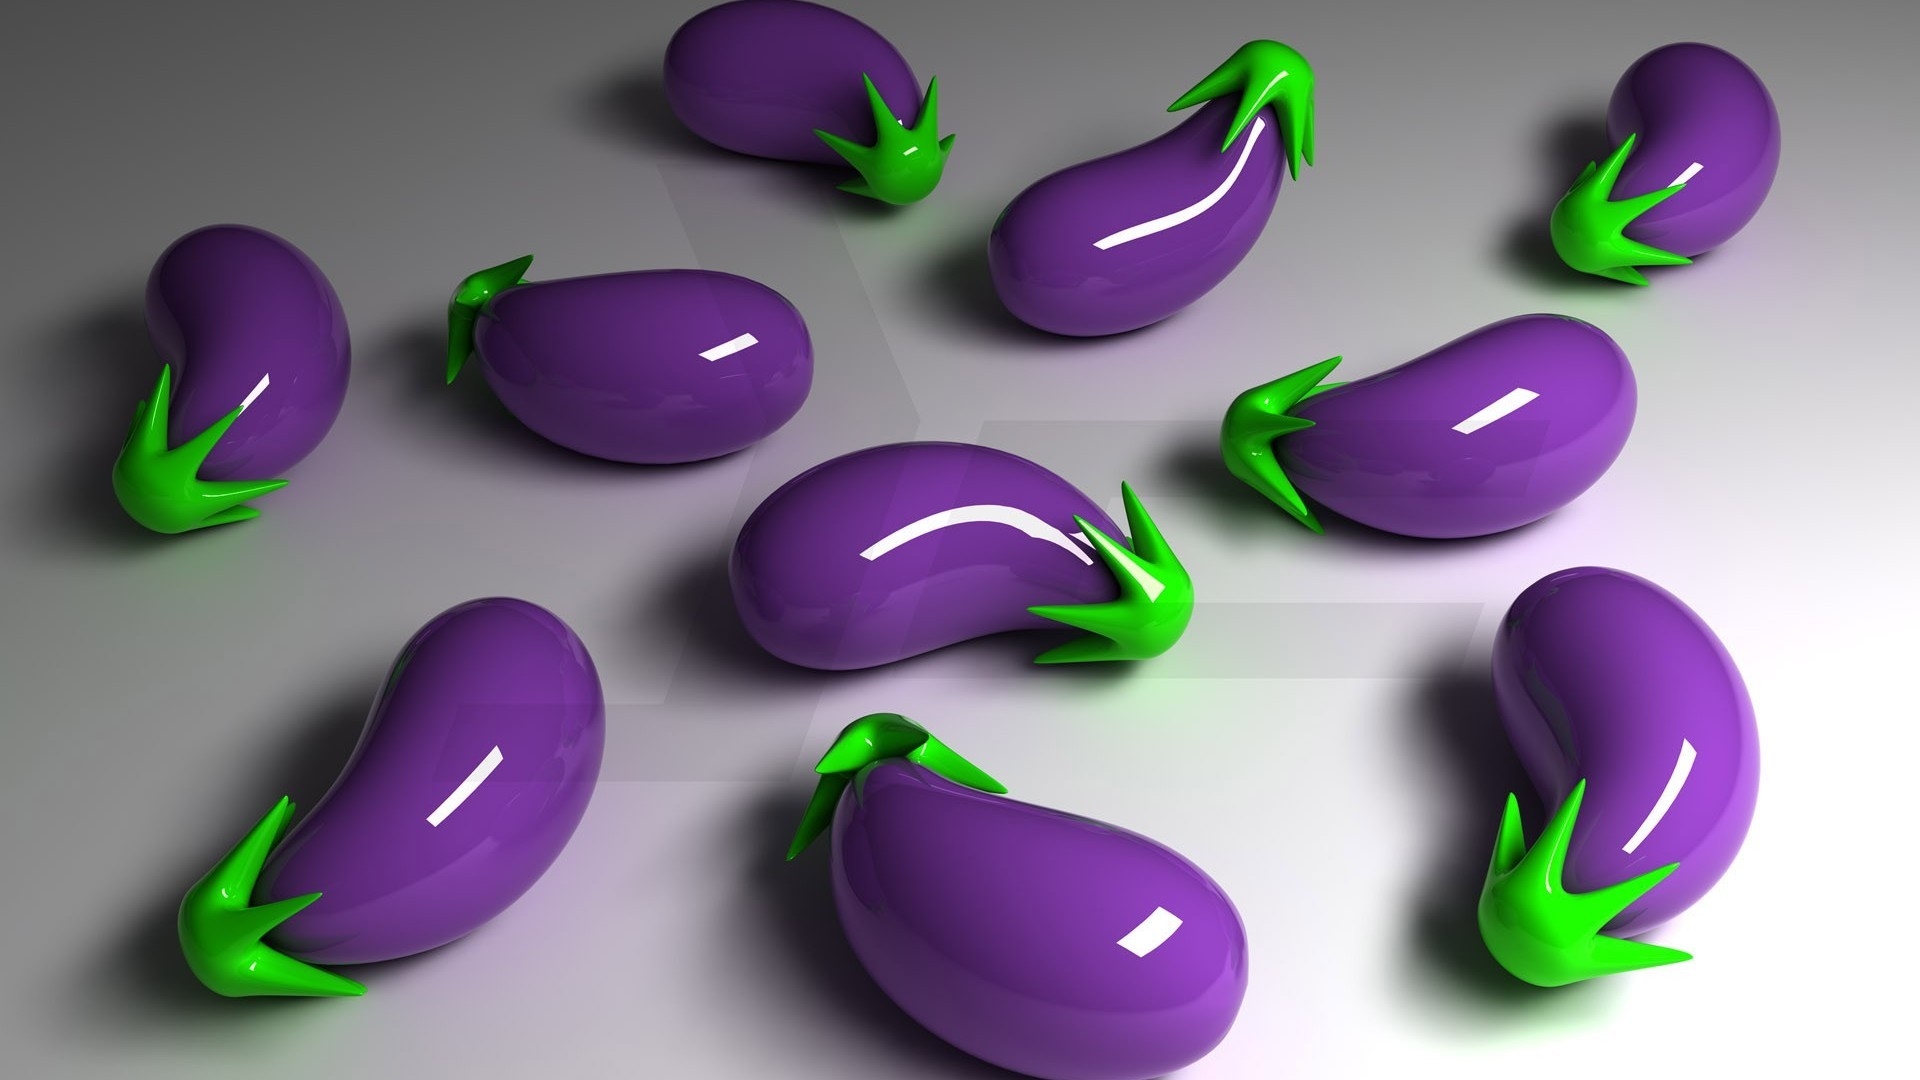 3D Eggplant for 1920 x 1080 HDTV 1080p resolution